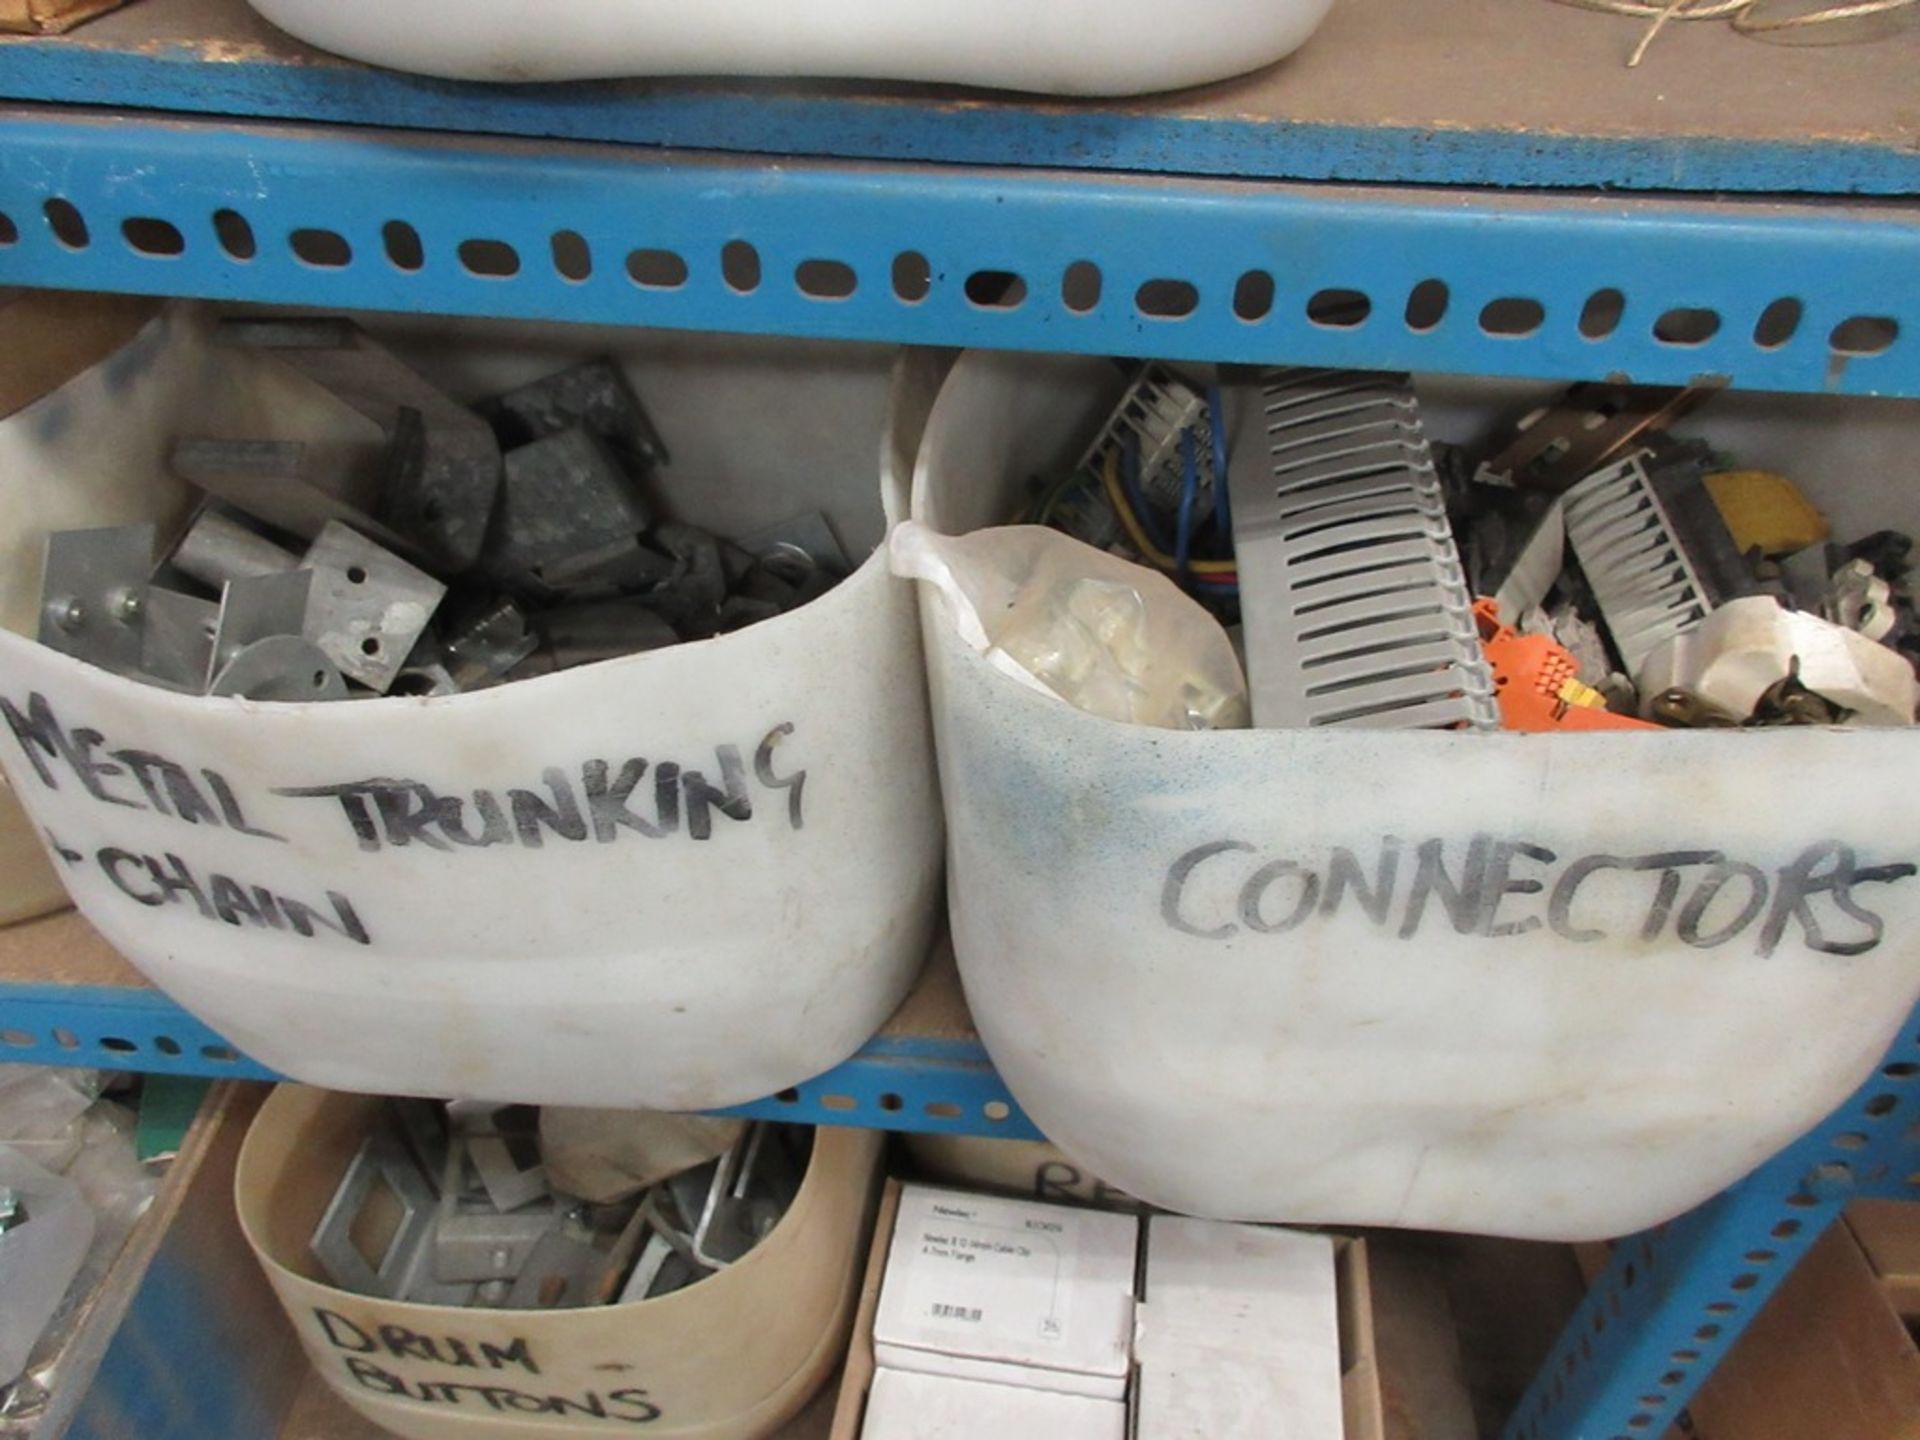 Assorted electrical stock including connectors, output modules, cable clips, flanges, fuse carriers, - Image 10 of 14